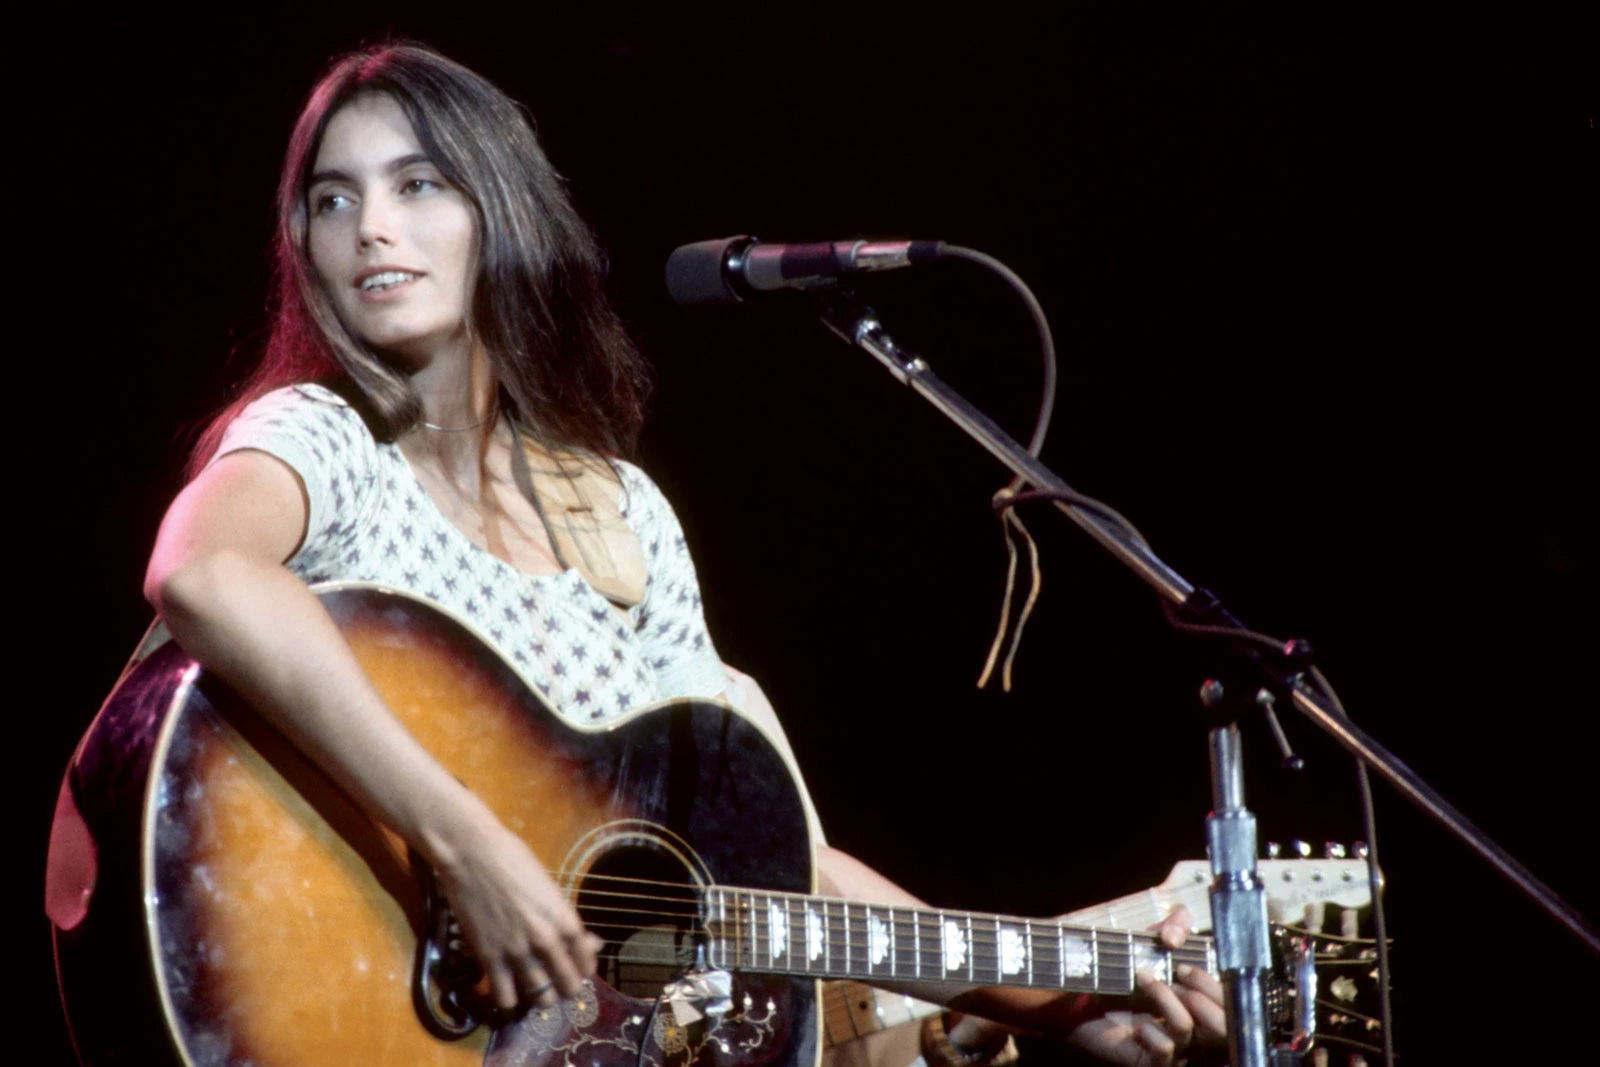 Emmylou-Harris-with-guitar-early-career